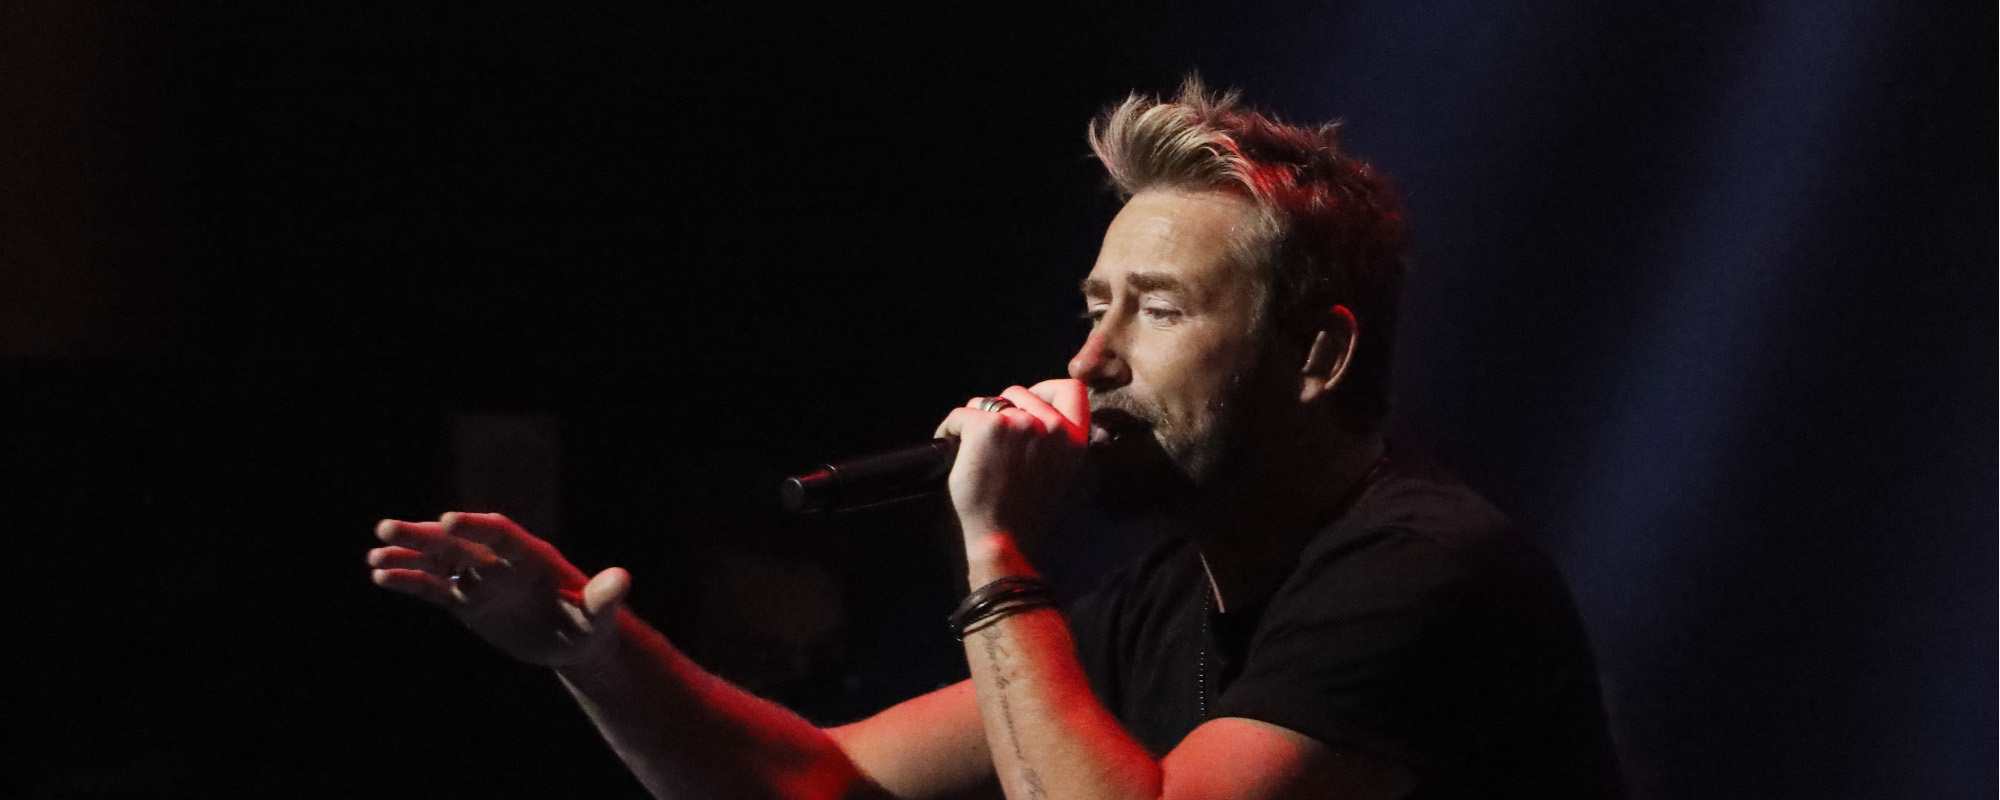 3 Songs You Didn’t Know Nickelback’s Chad Kroeger Wrote For Other Artists